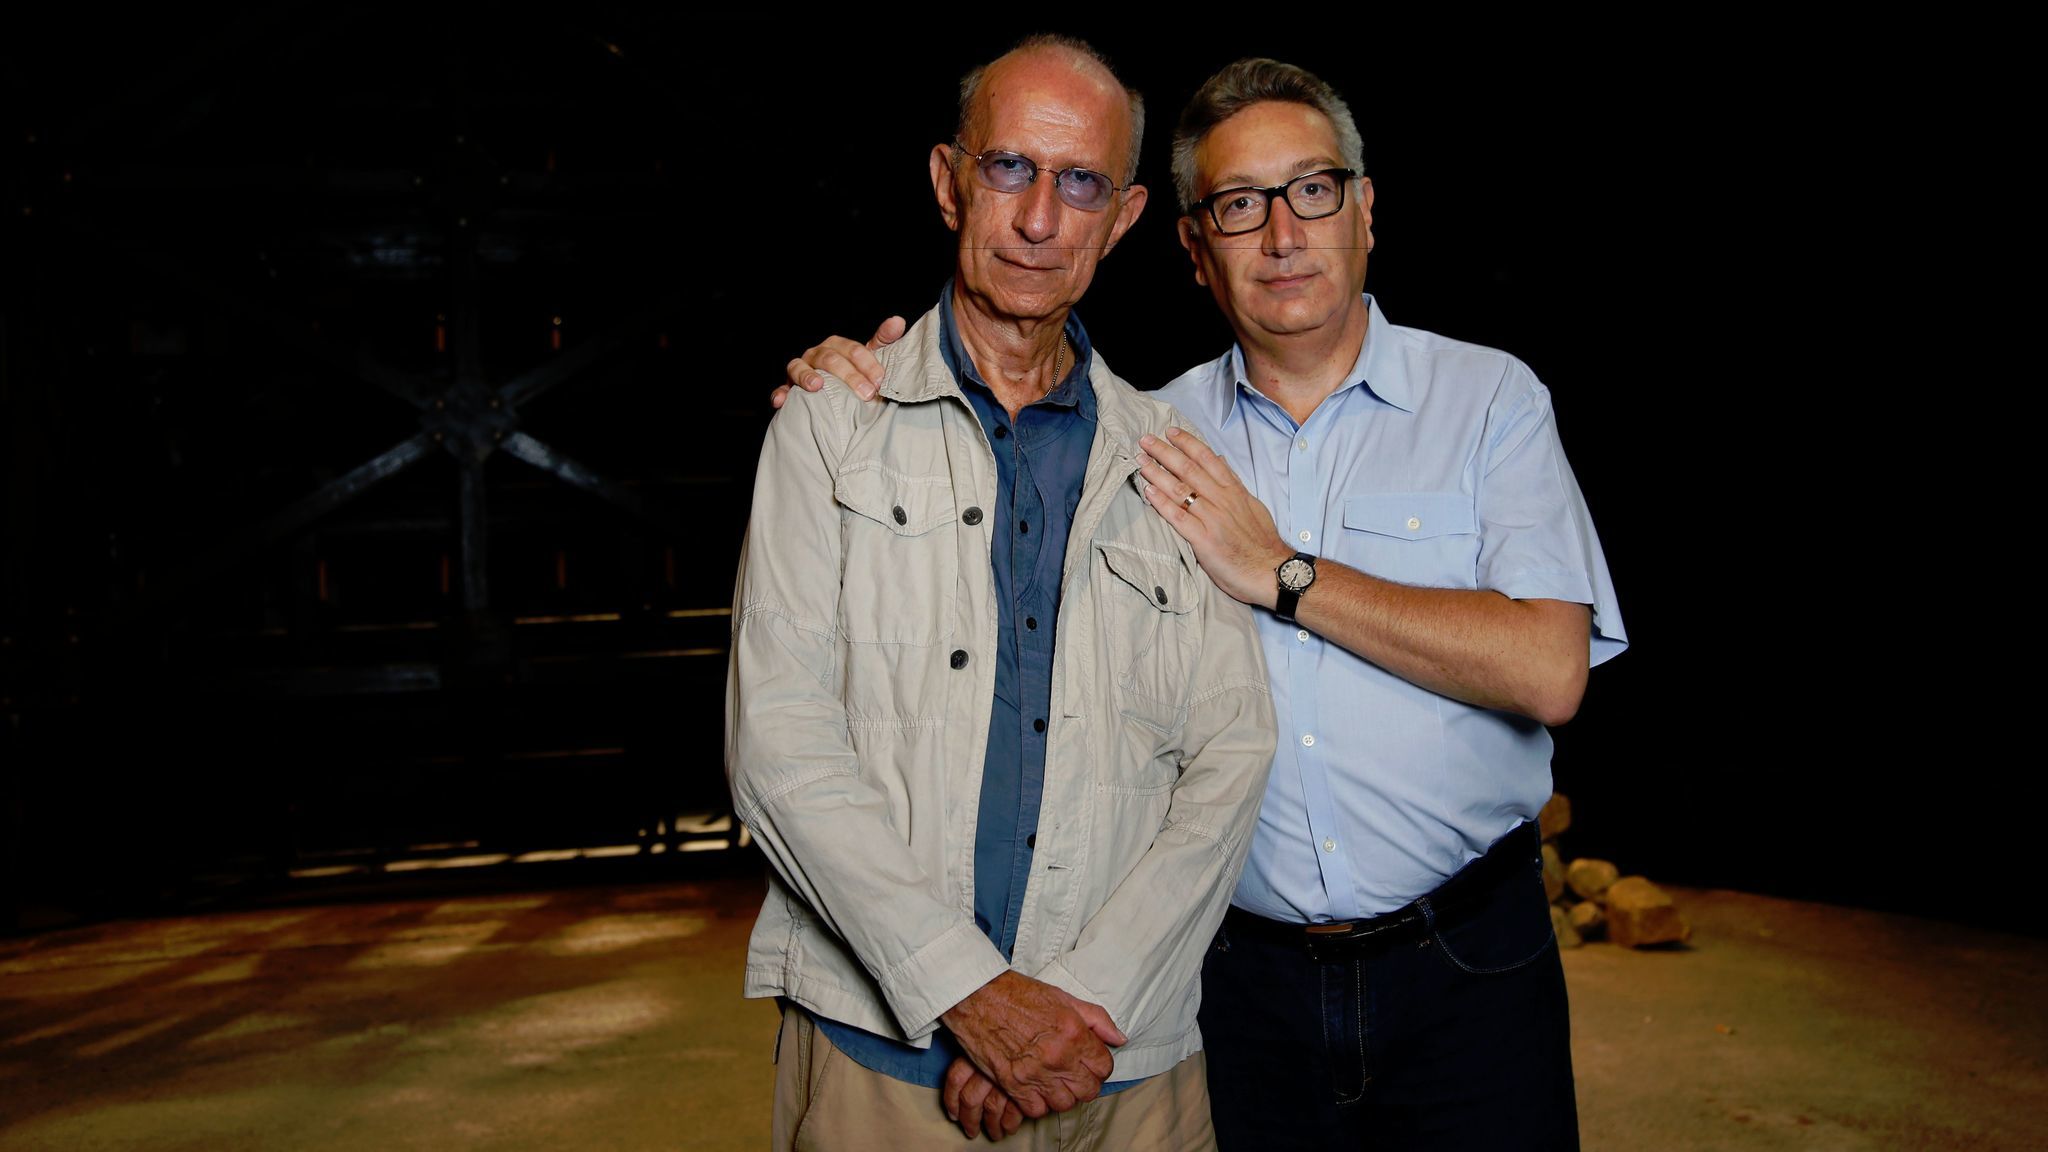 Playwright Martin Sherman, left, and director Moises Kaufman, of the play "Bent," on stage in the Mark Taper Forum theater.